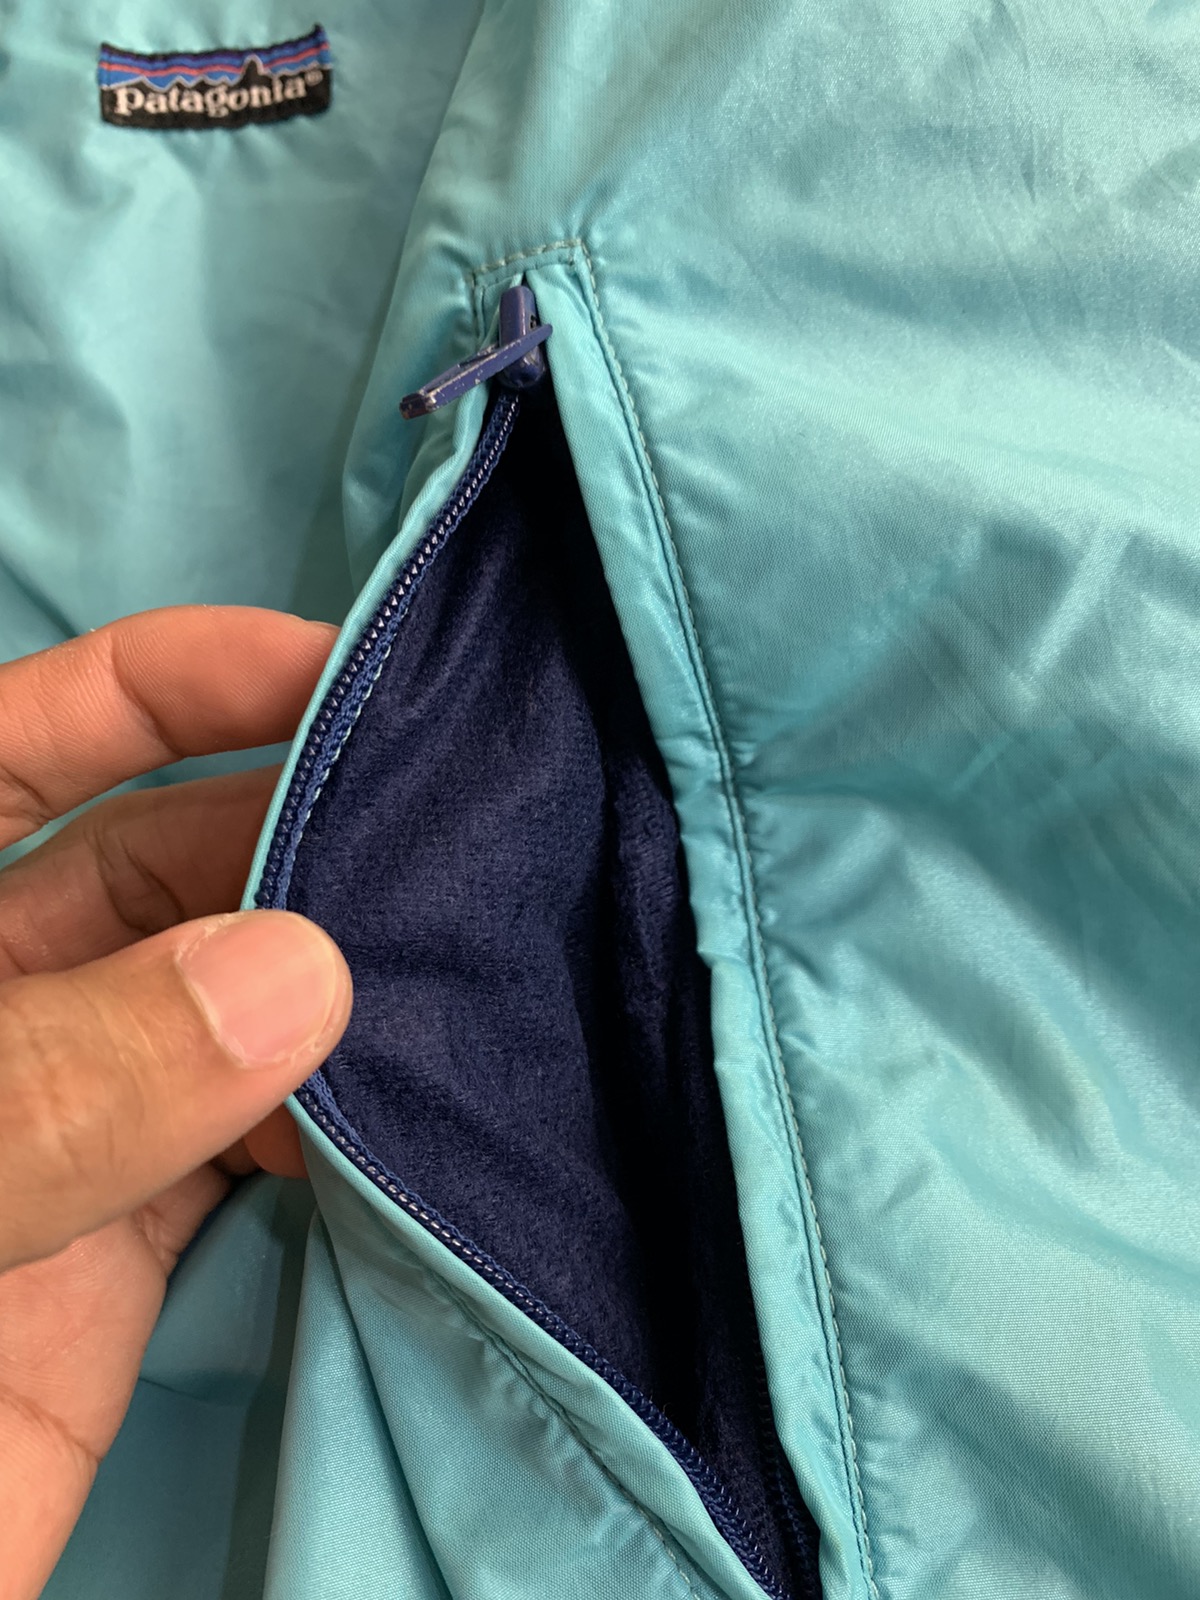 patagonia bomber jacket for 10 years old kids - 8